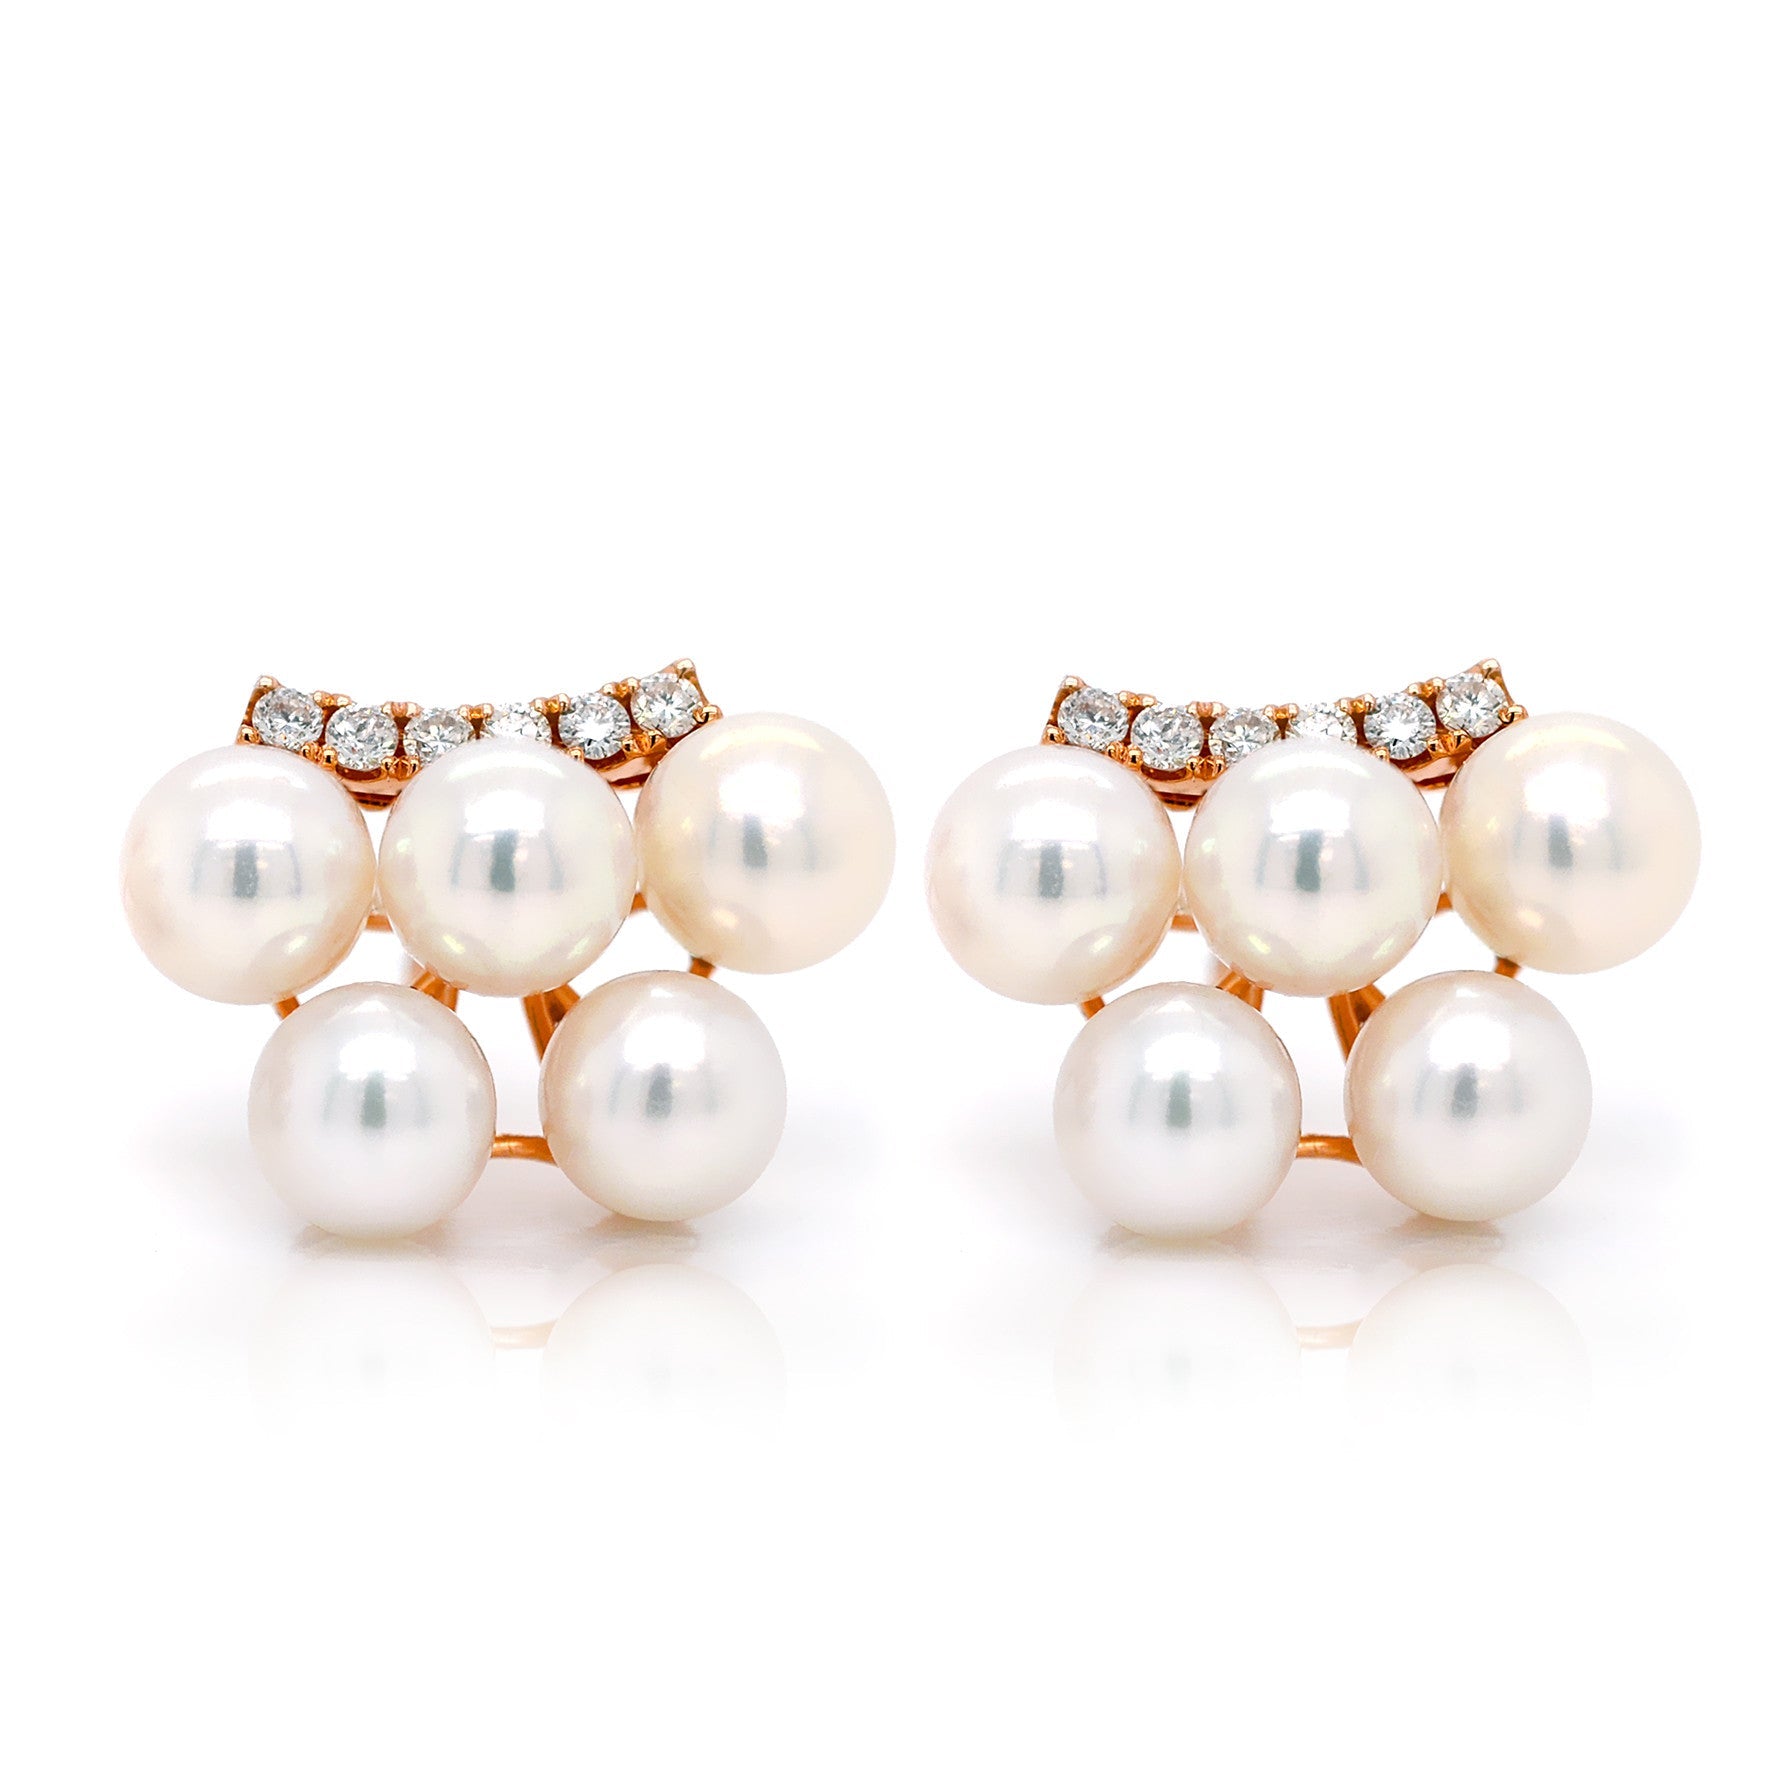 South Sea Pearl Earrings in Rose Gold with Diamonds - ForeverJewels Design Studio 8